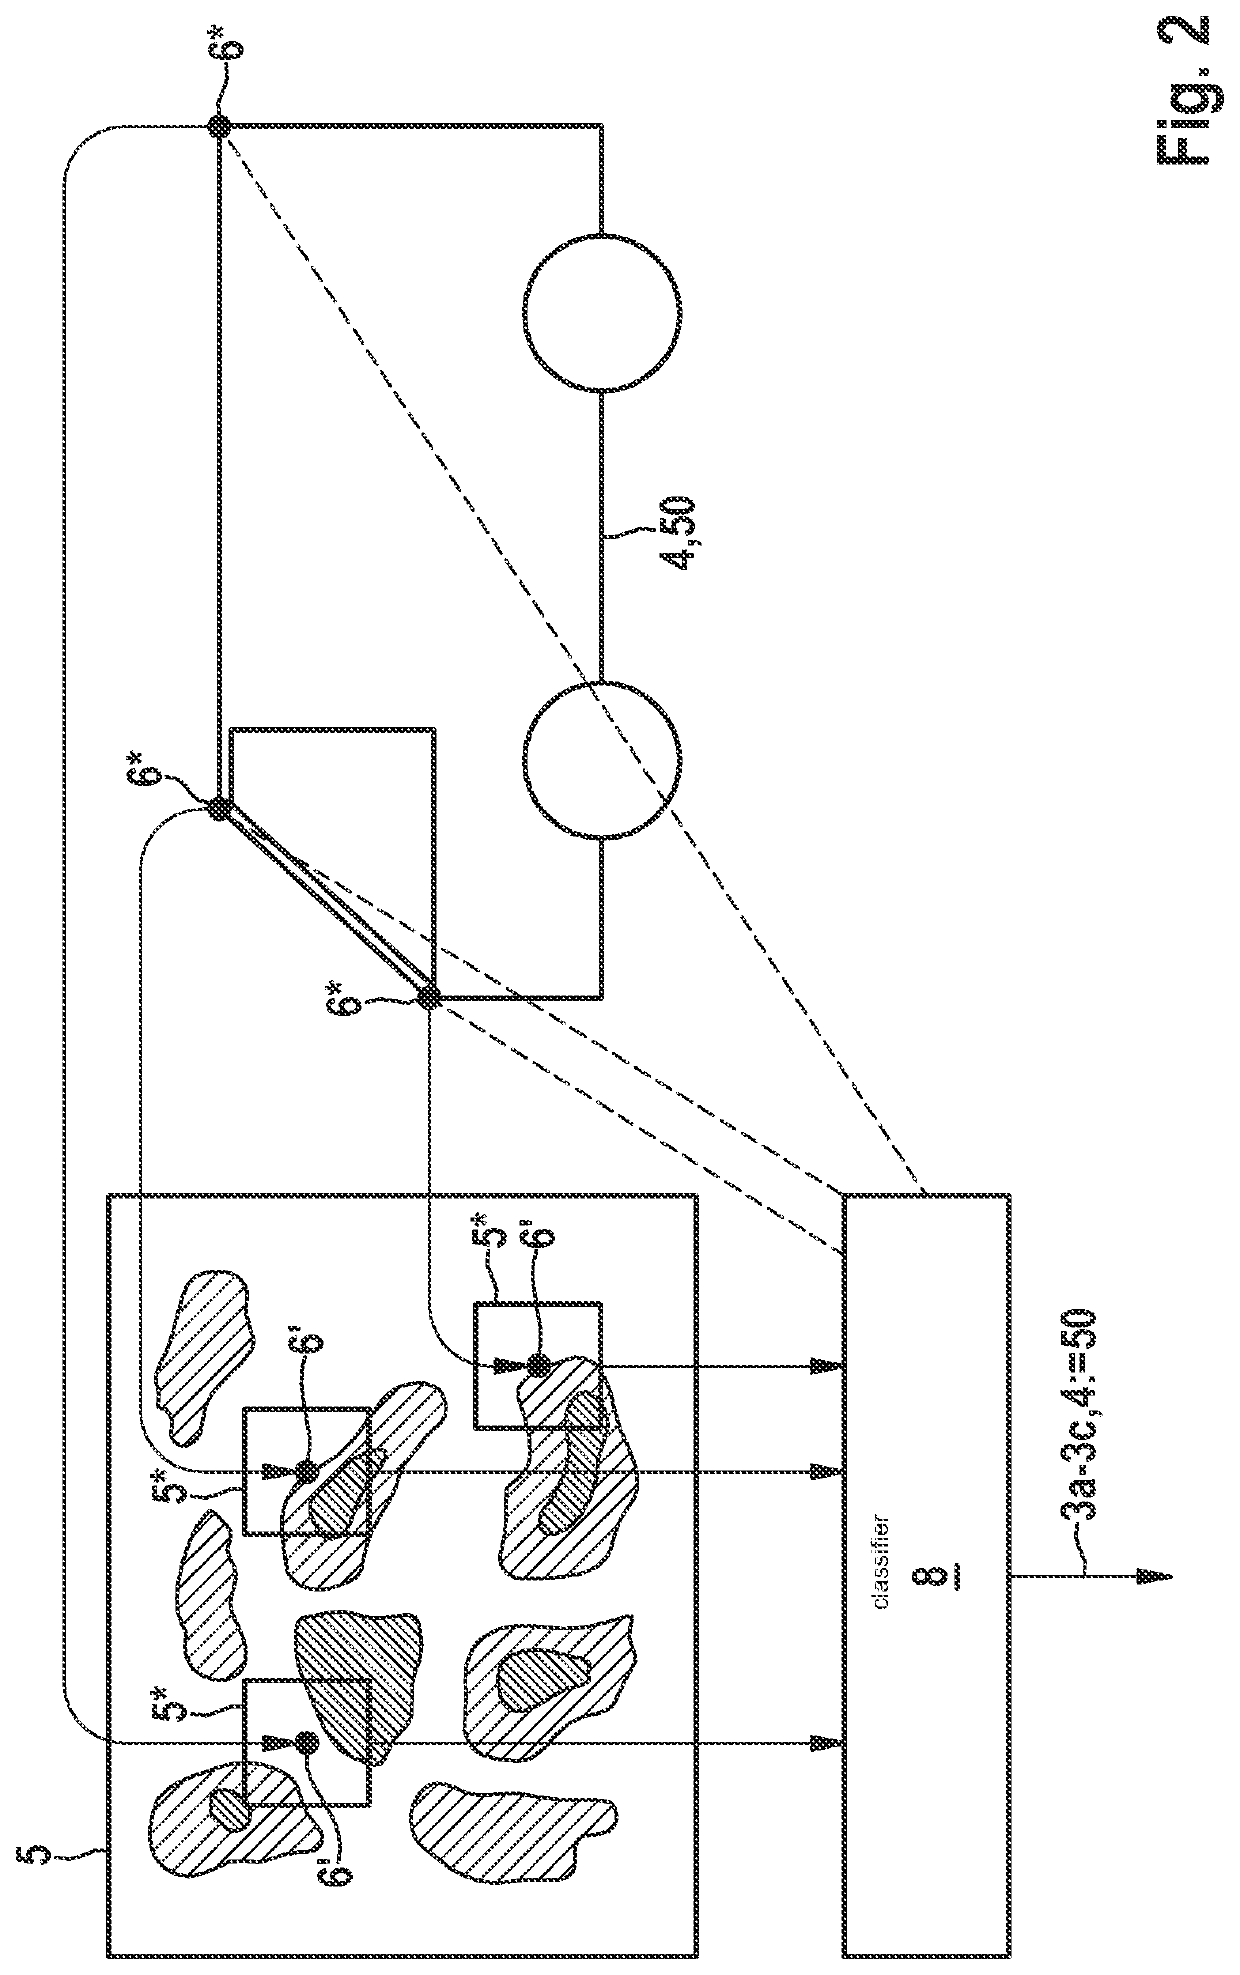 Hybrid evaluation of radar data for classifying objects